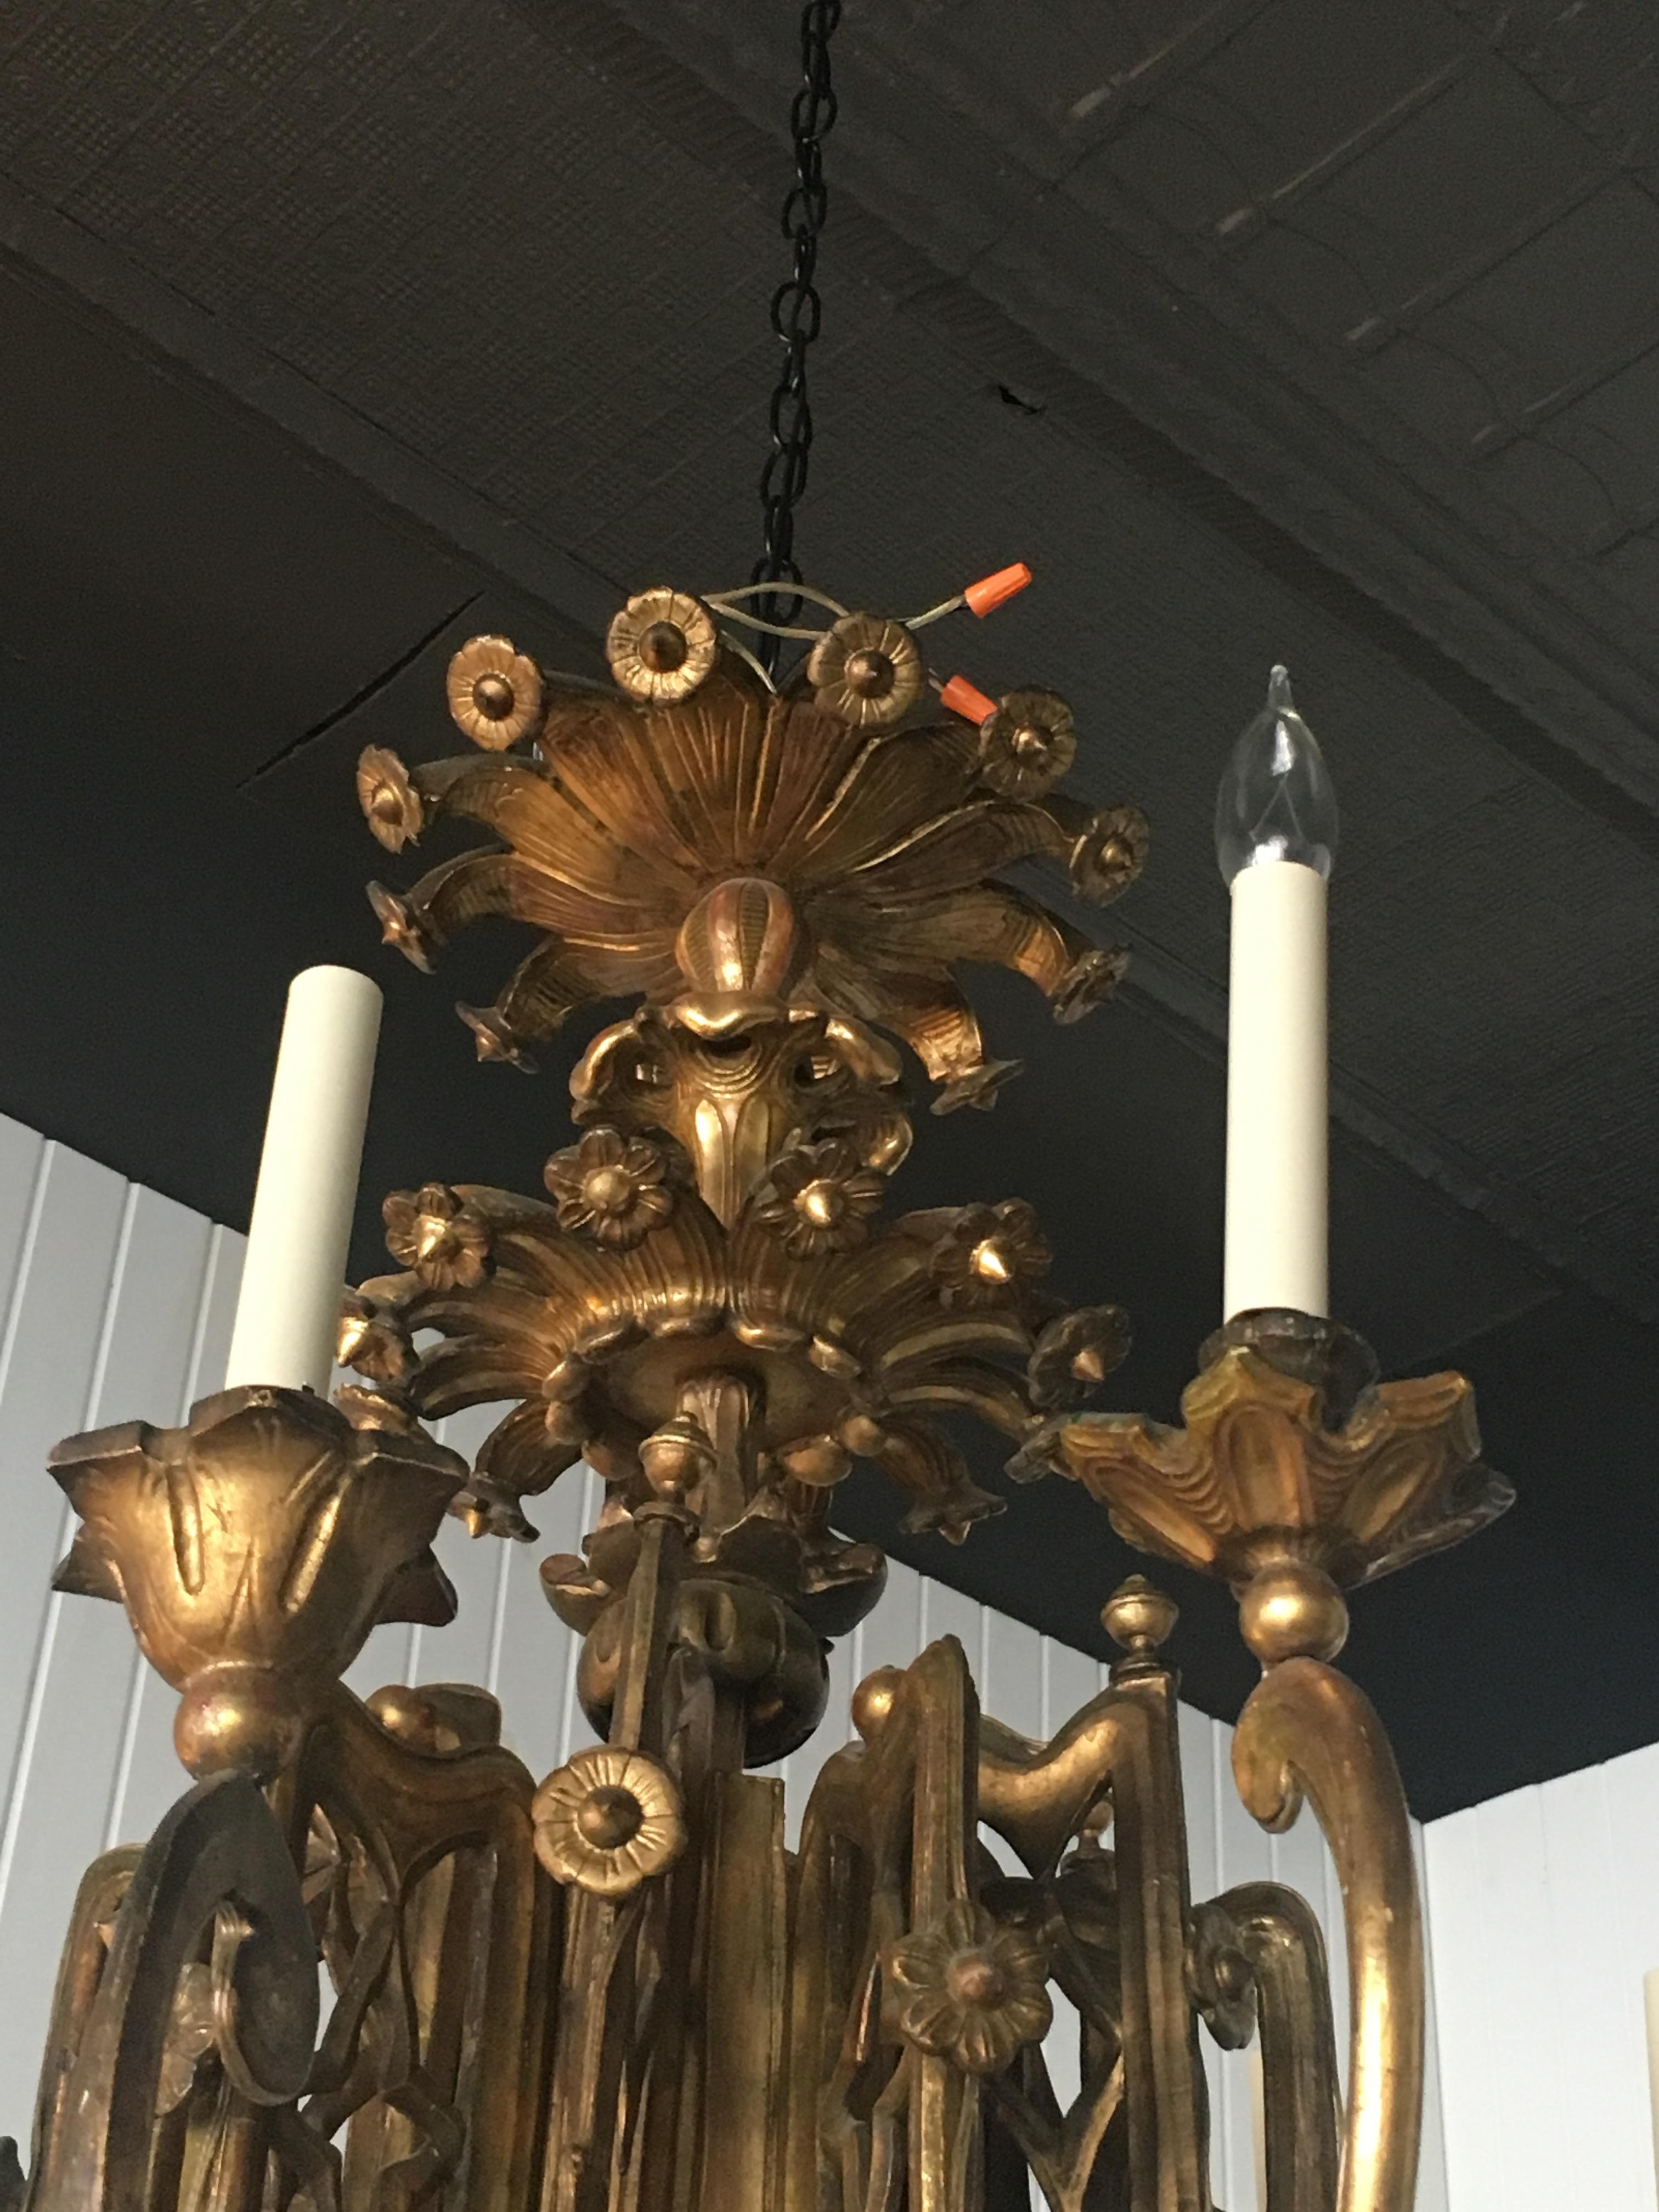 Exceptional pair of 19th century English giltwood twelve-light chandeliers. Great form and scale. Priced per chandelier.